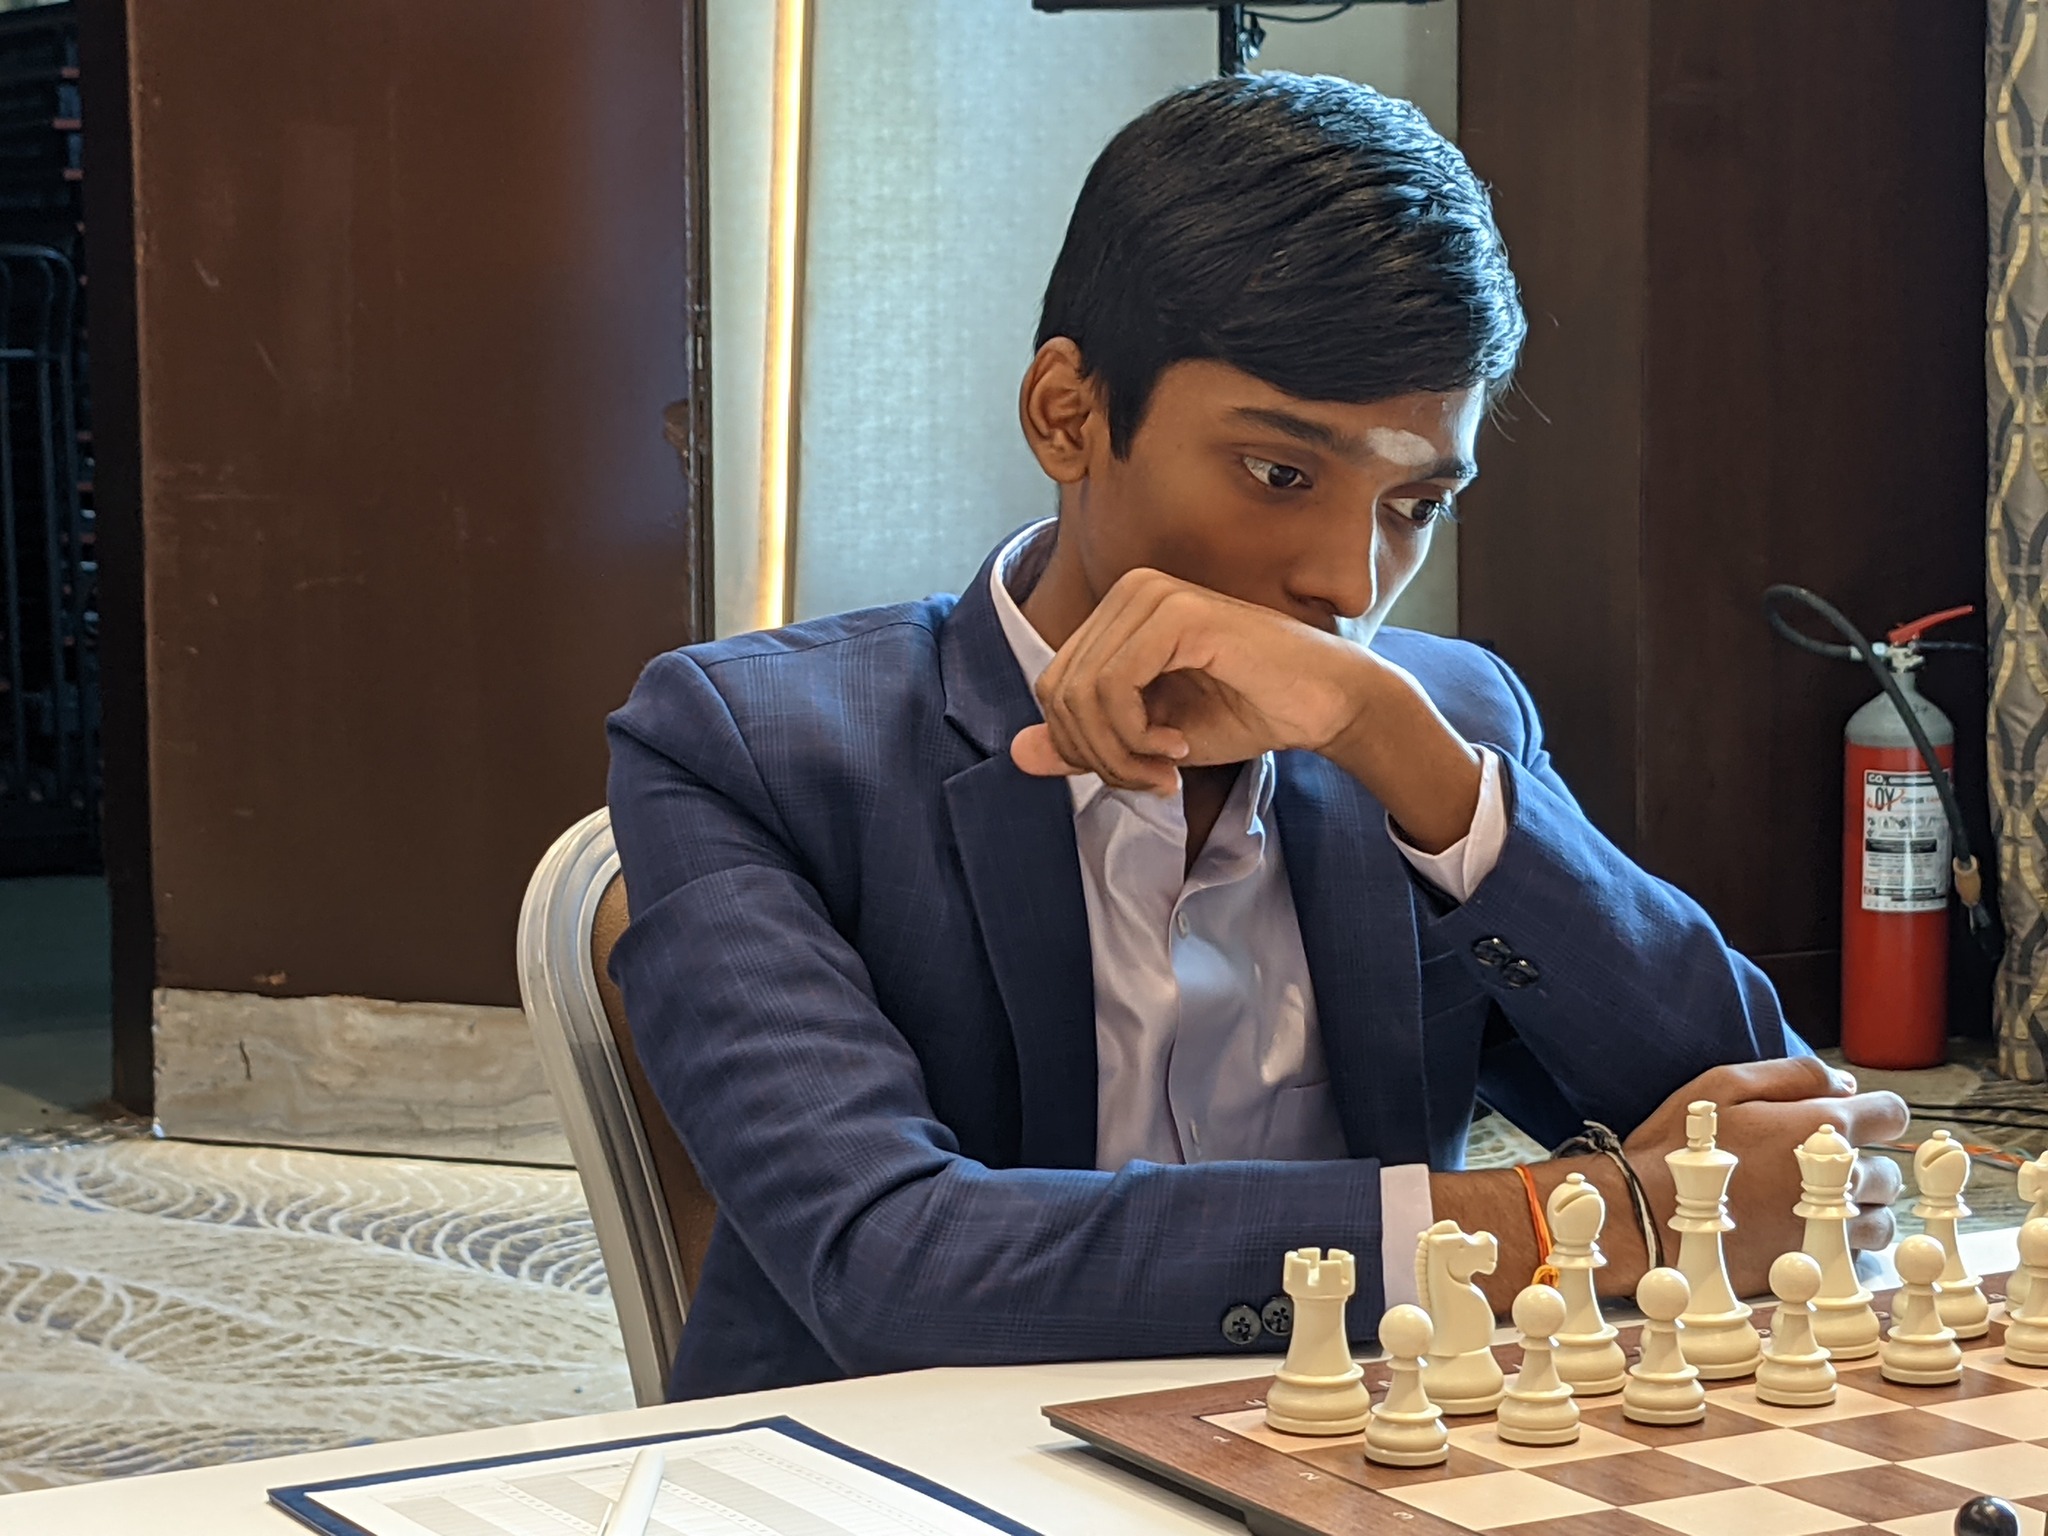 The Bridge  Indian Sports on Instagram: Earlier this year, Praggnanandhaa  qualified for the FIDE Candidates. Now, after Vaishali's qualification,  they have become the FIRST sibling pair ever to make it to